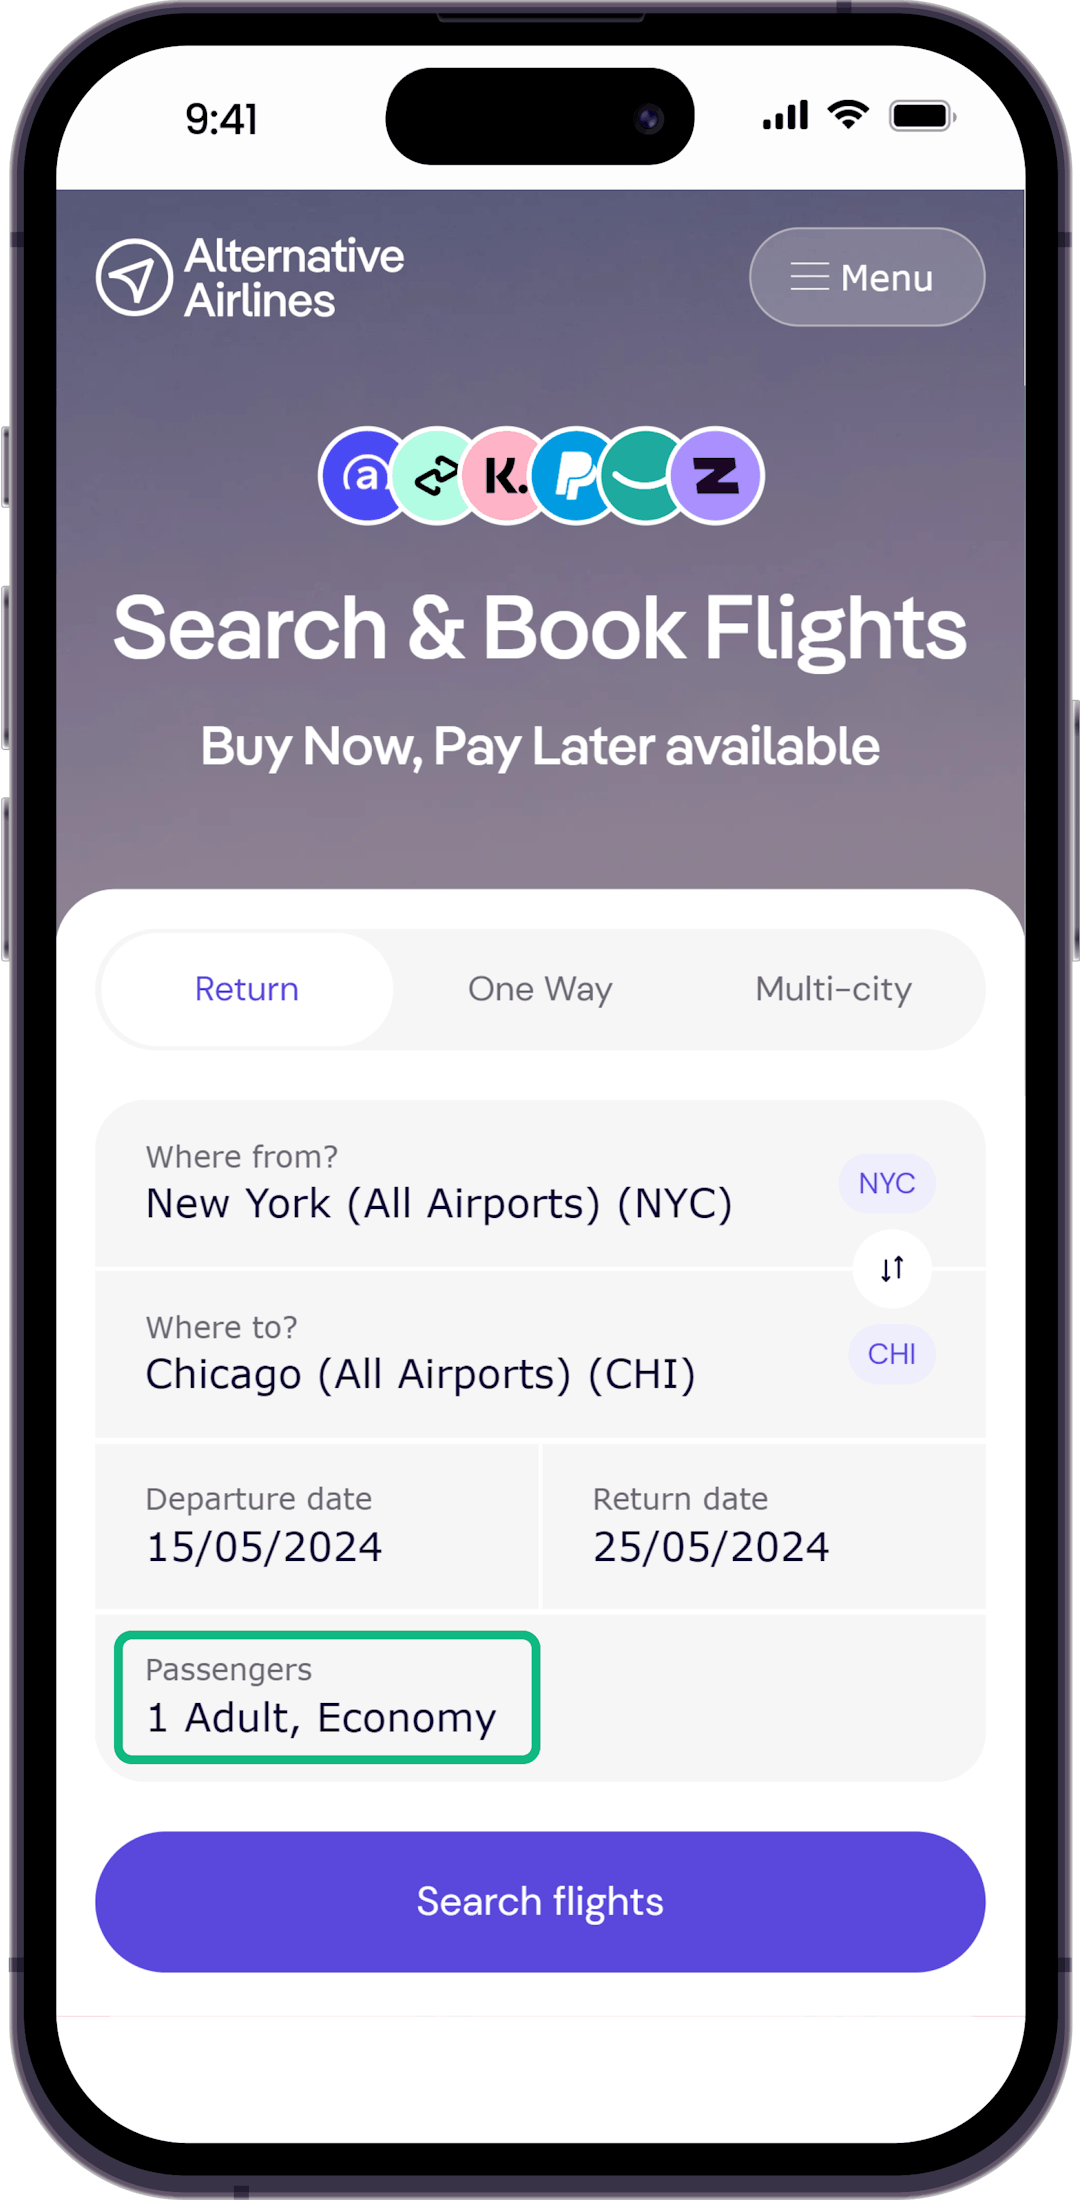 Step 1 - Search for economy flights